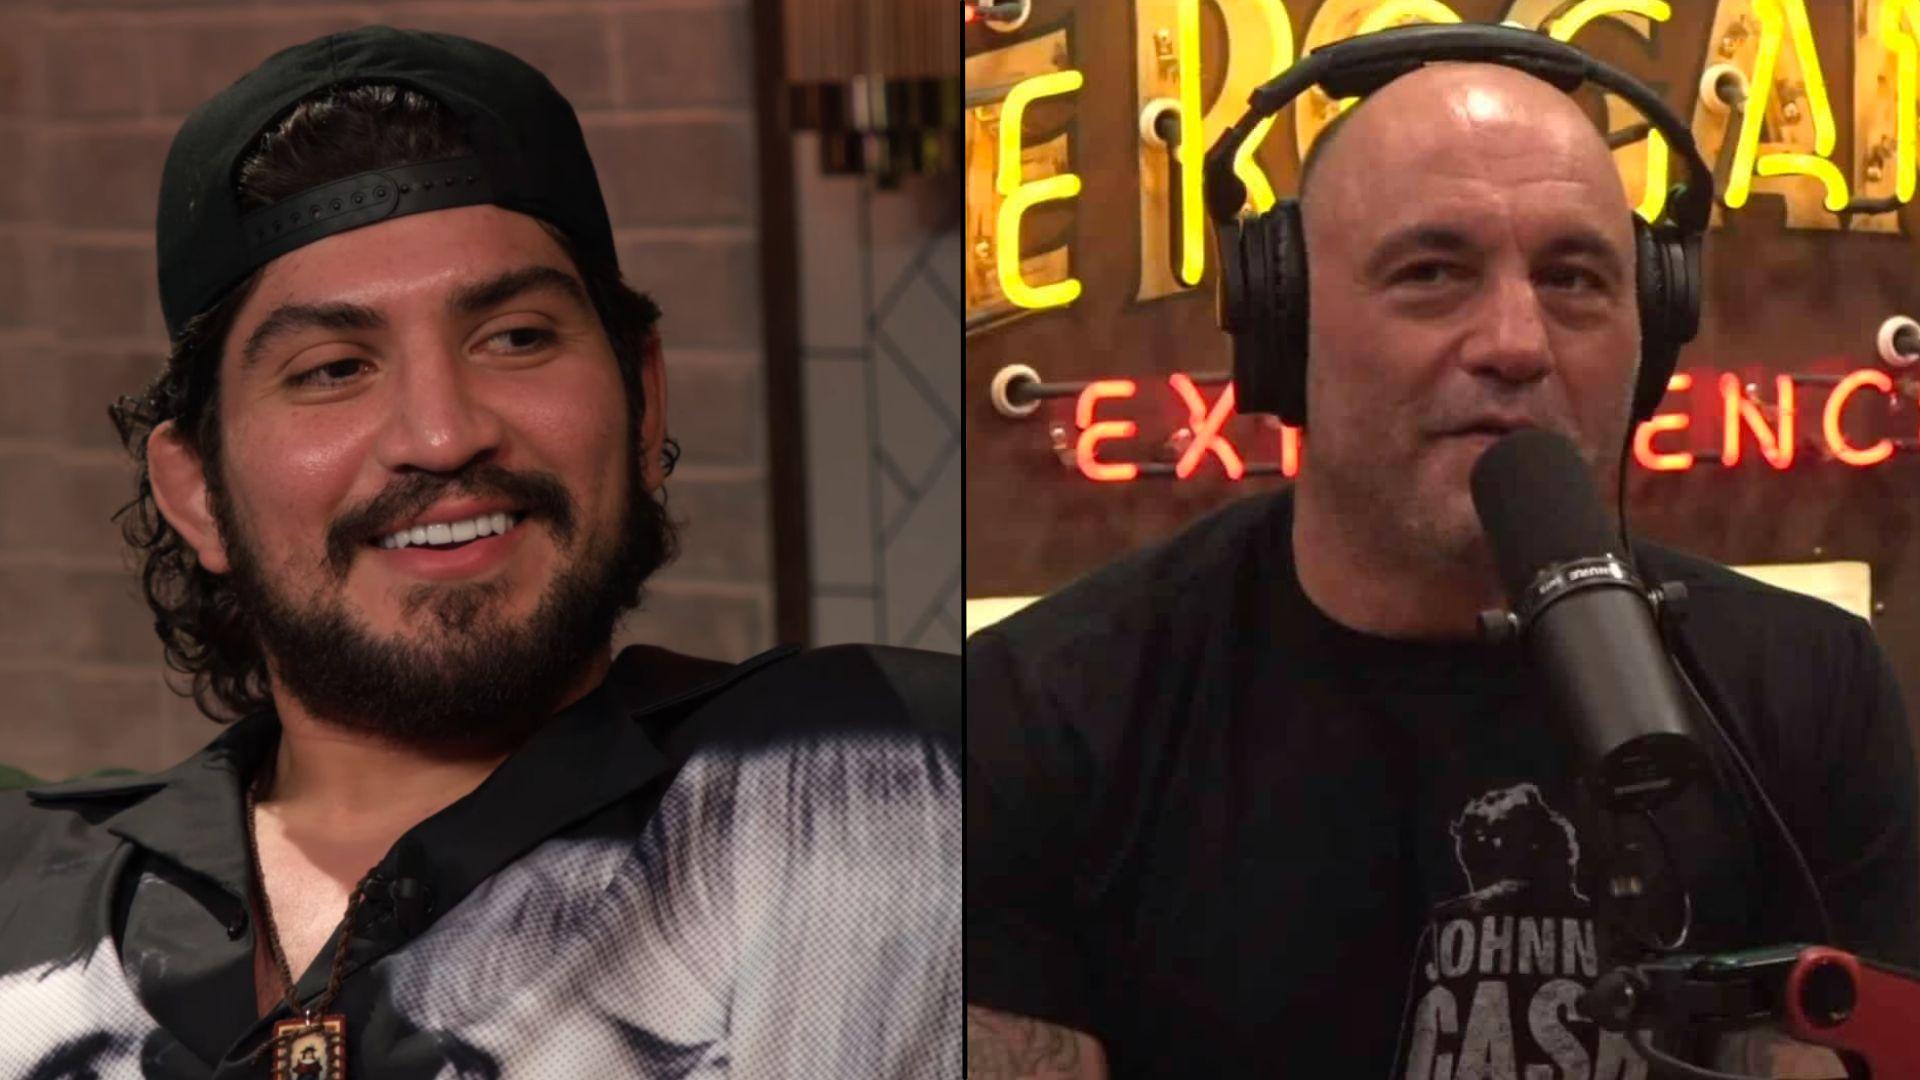 Dilon Danis and Joe Rogan side-by-side on podcasts